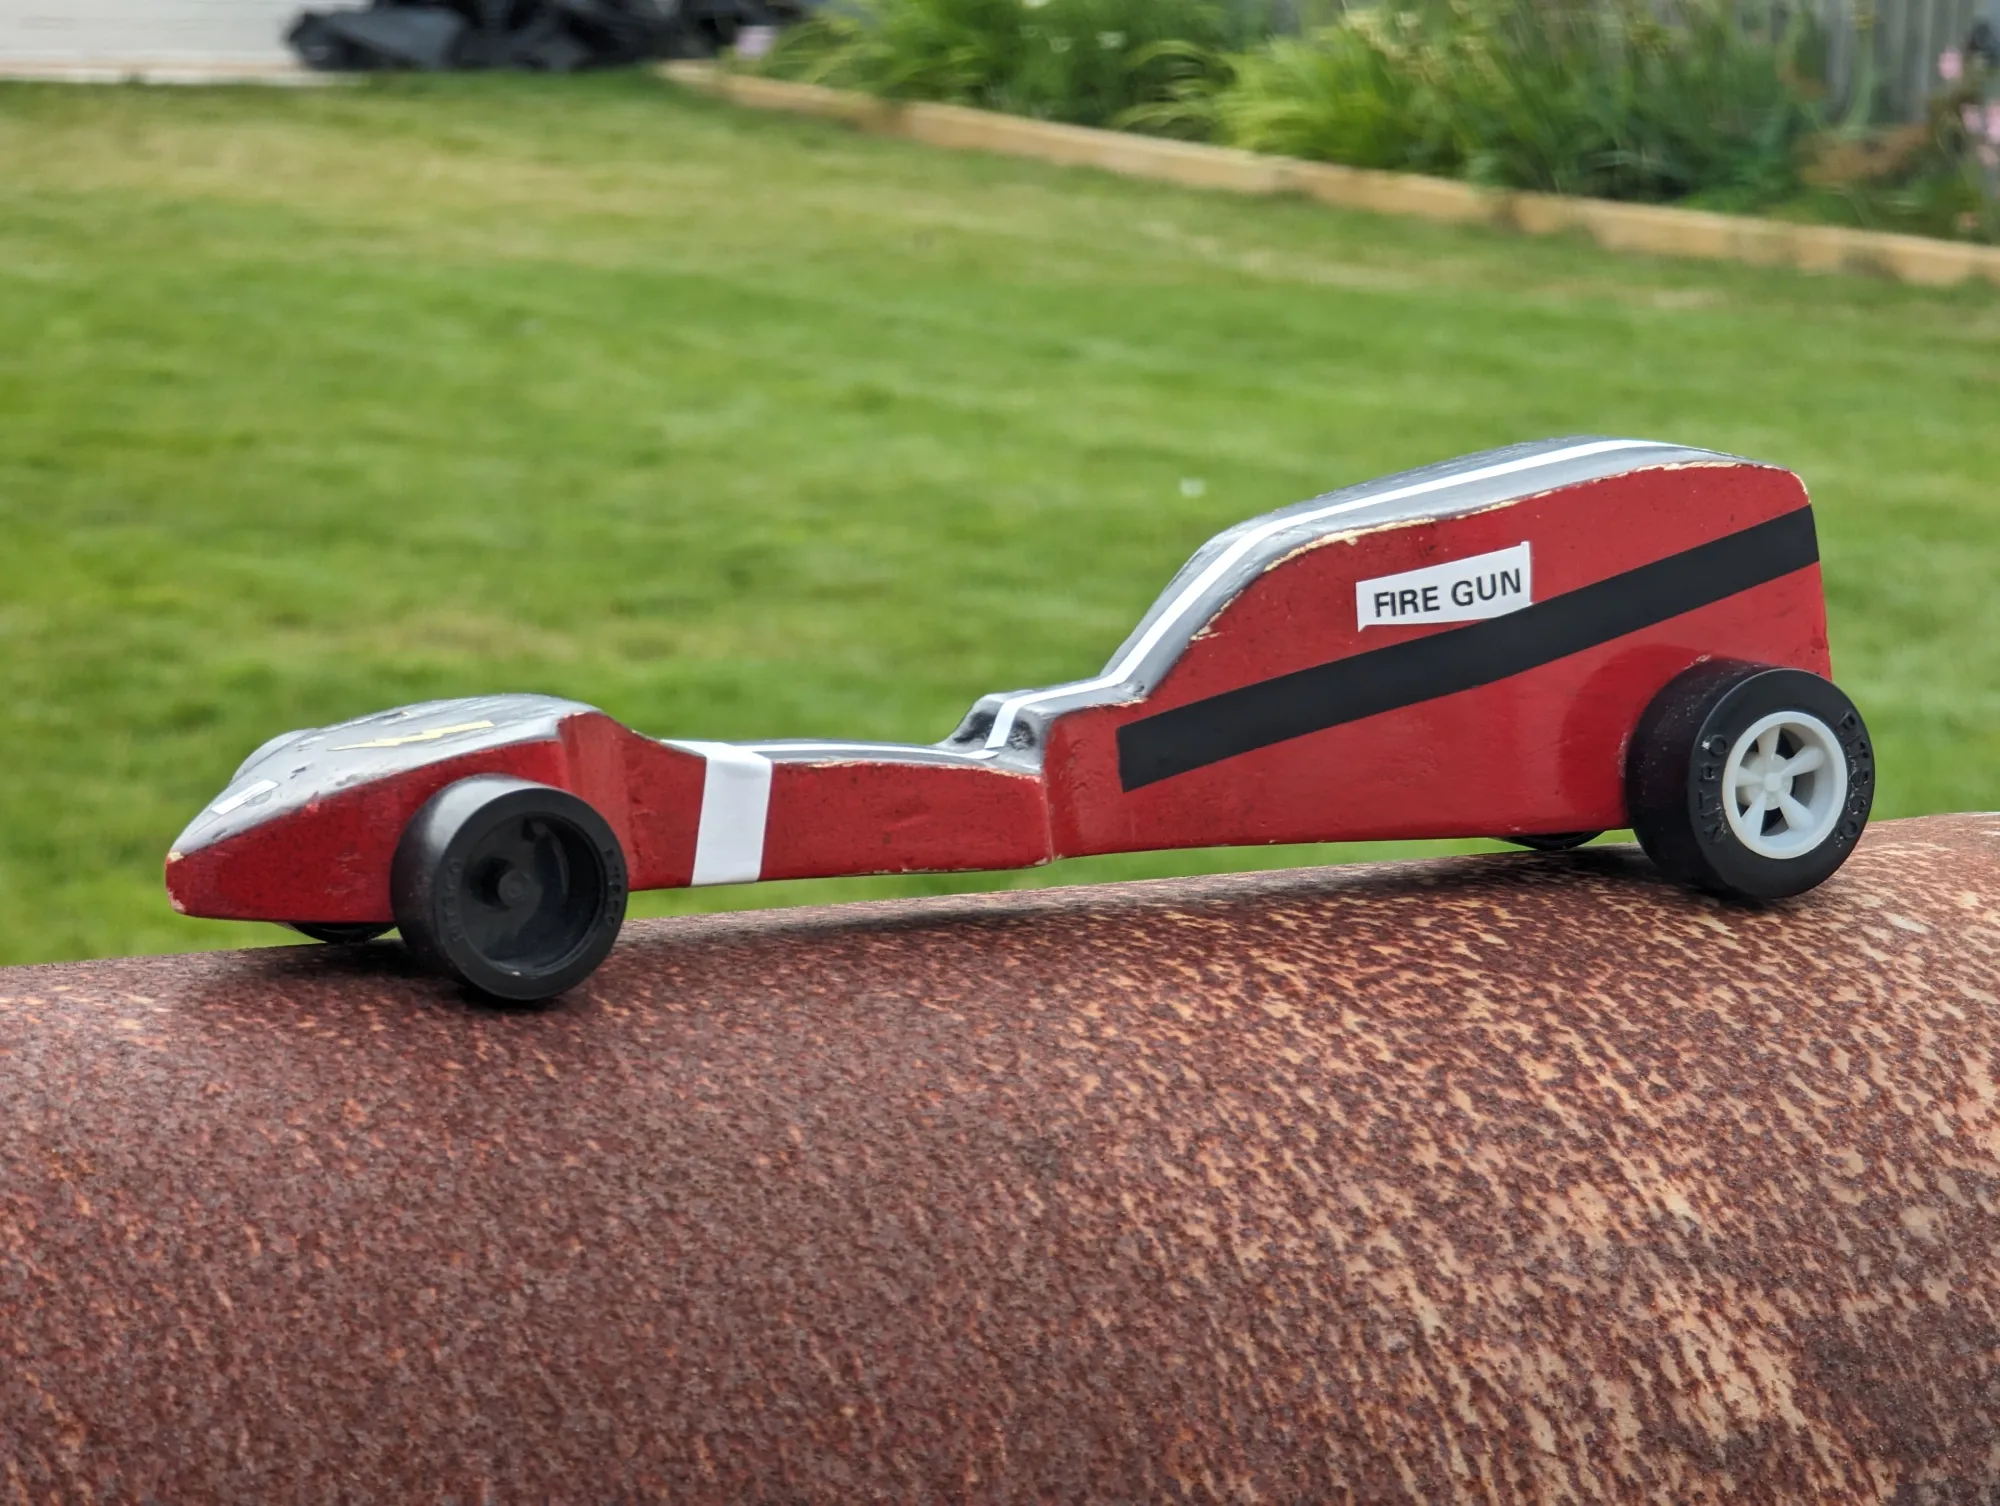 3/4s view of a wooden car with a red side and black top.